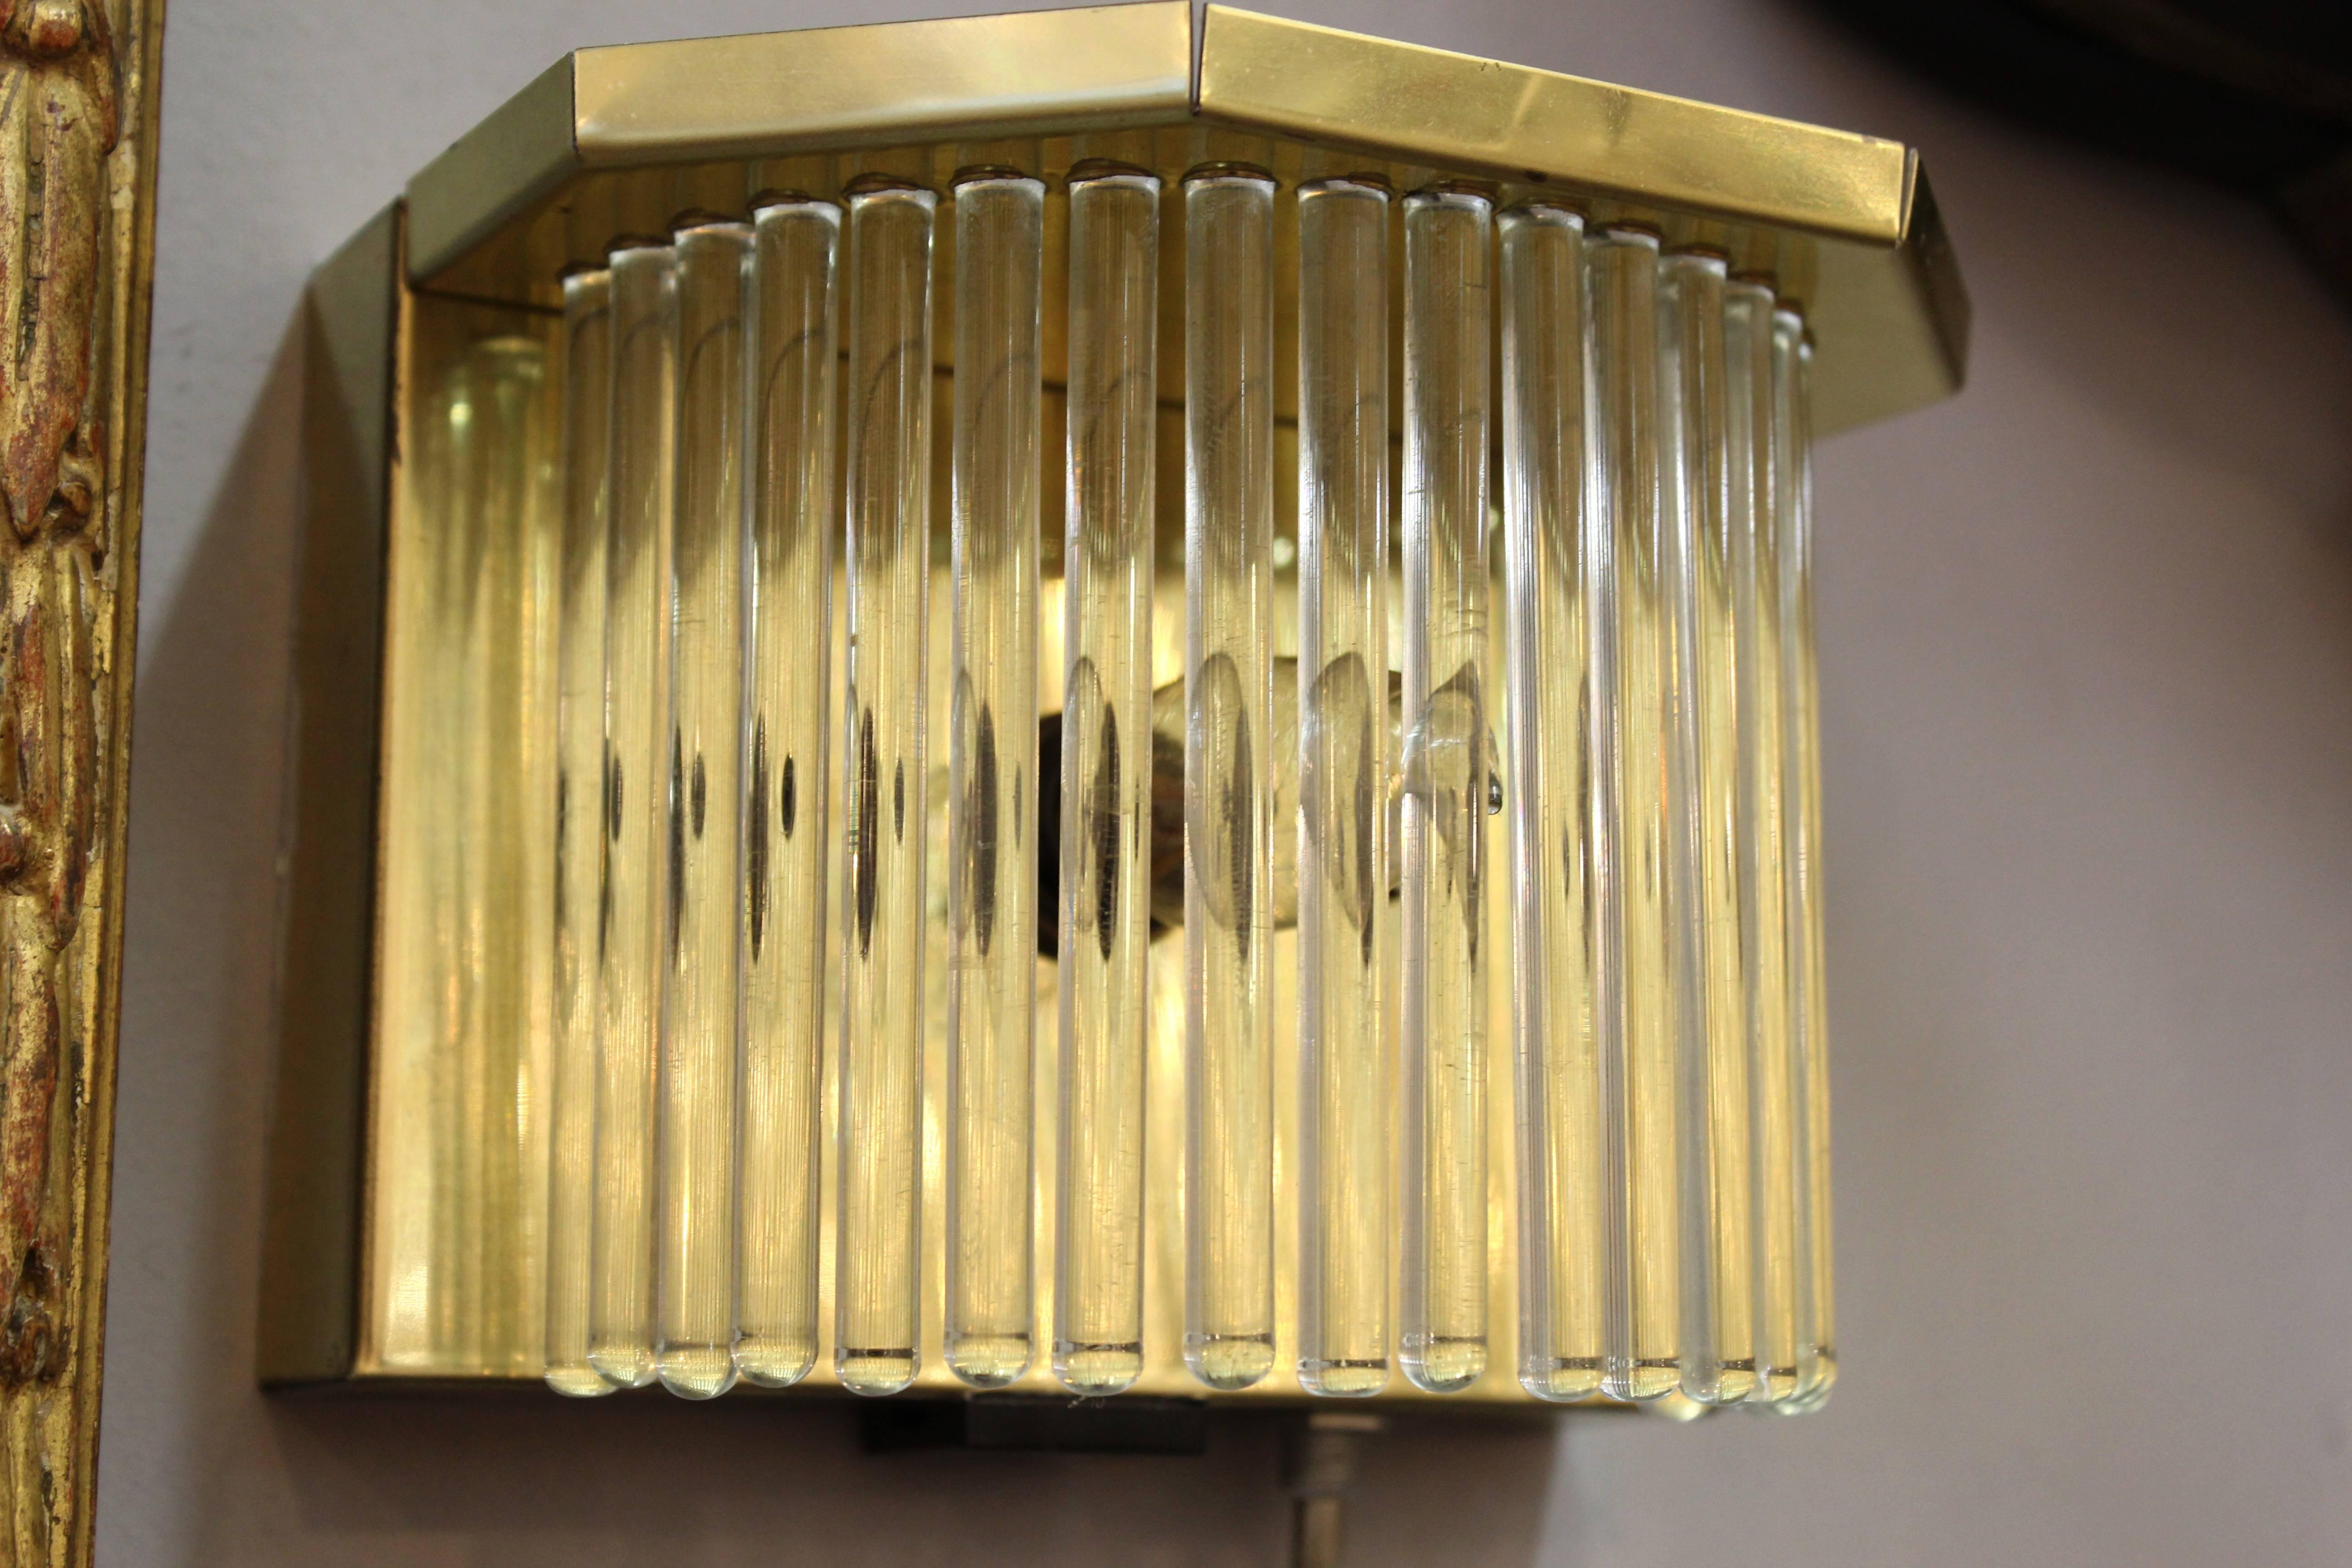 A pair of Mid-Century Modern brass and glass sconces made by designer Gaetano Sciolari in Italy in the 1970s. The brass frame holds a semi-circular row of glass rods that surround the light source. In great vintage condition with age appropriate